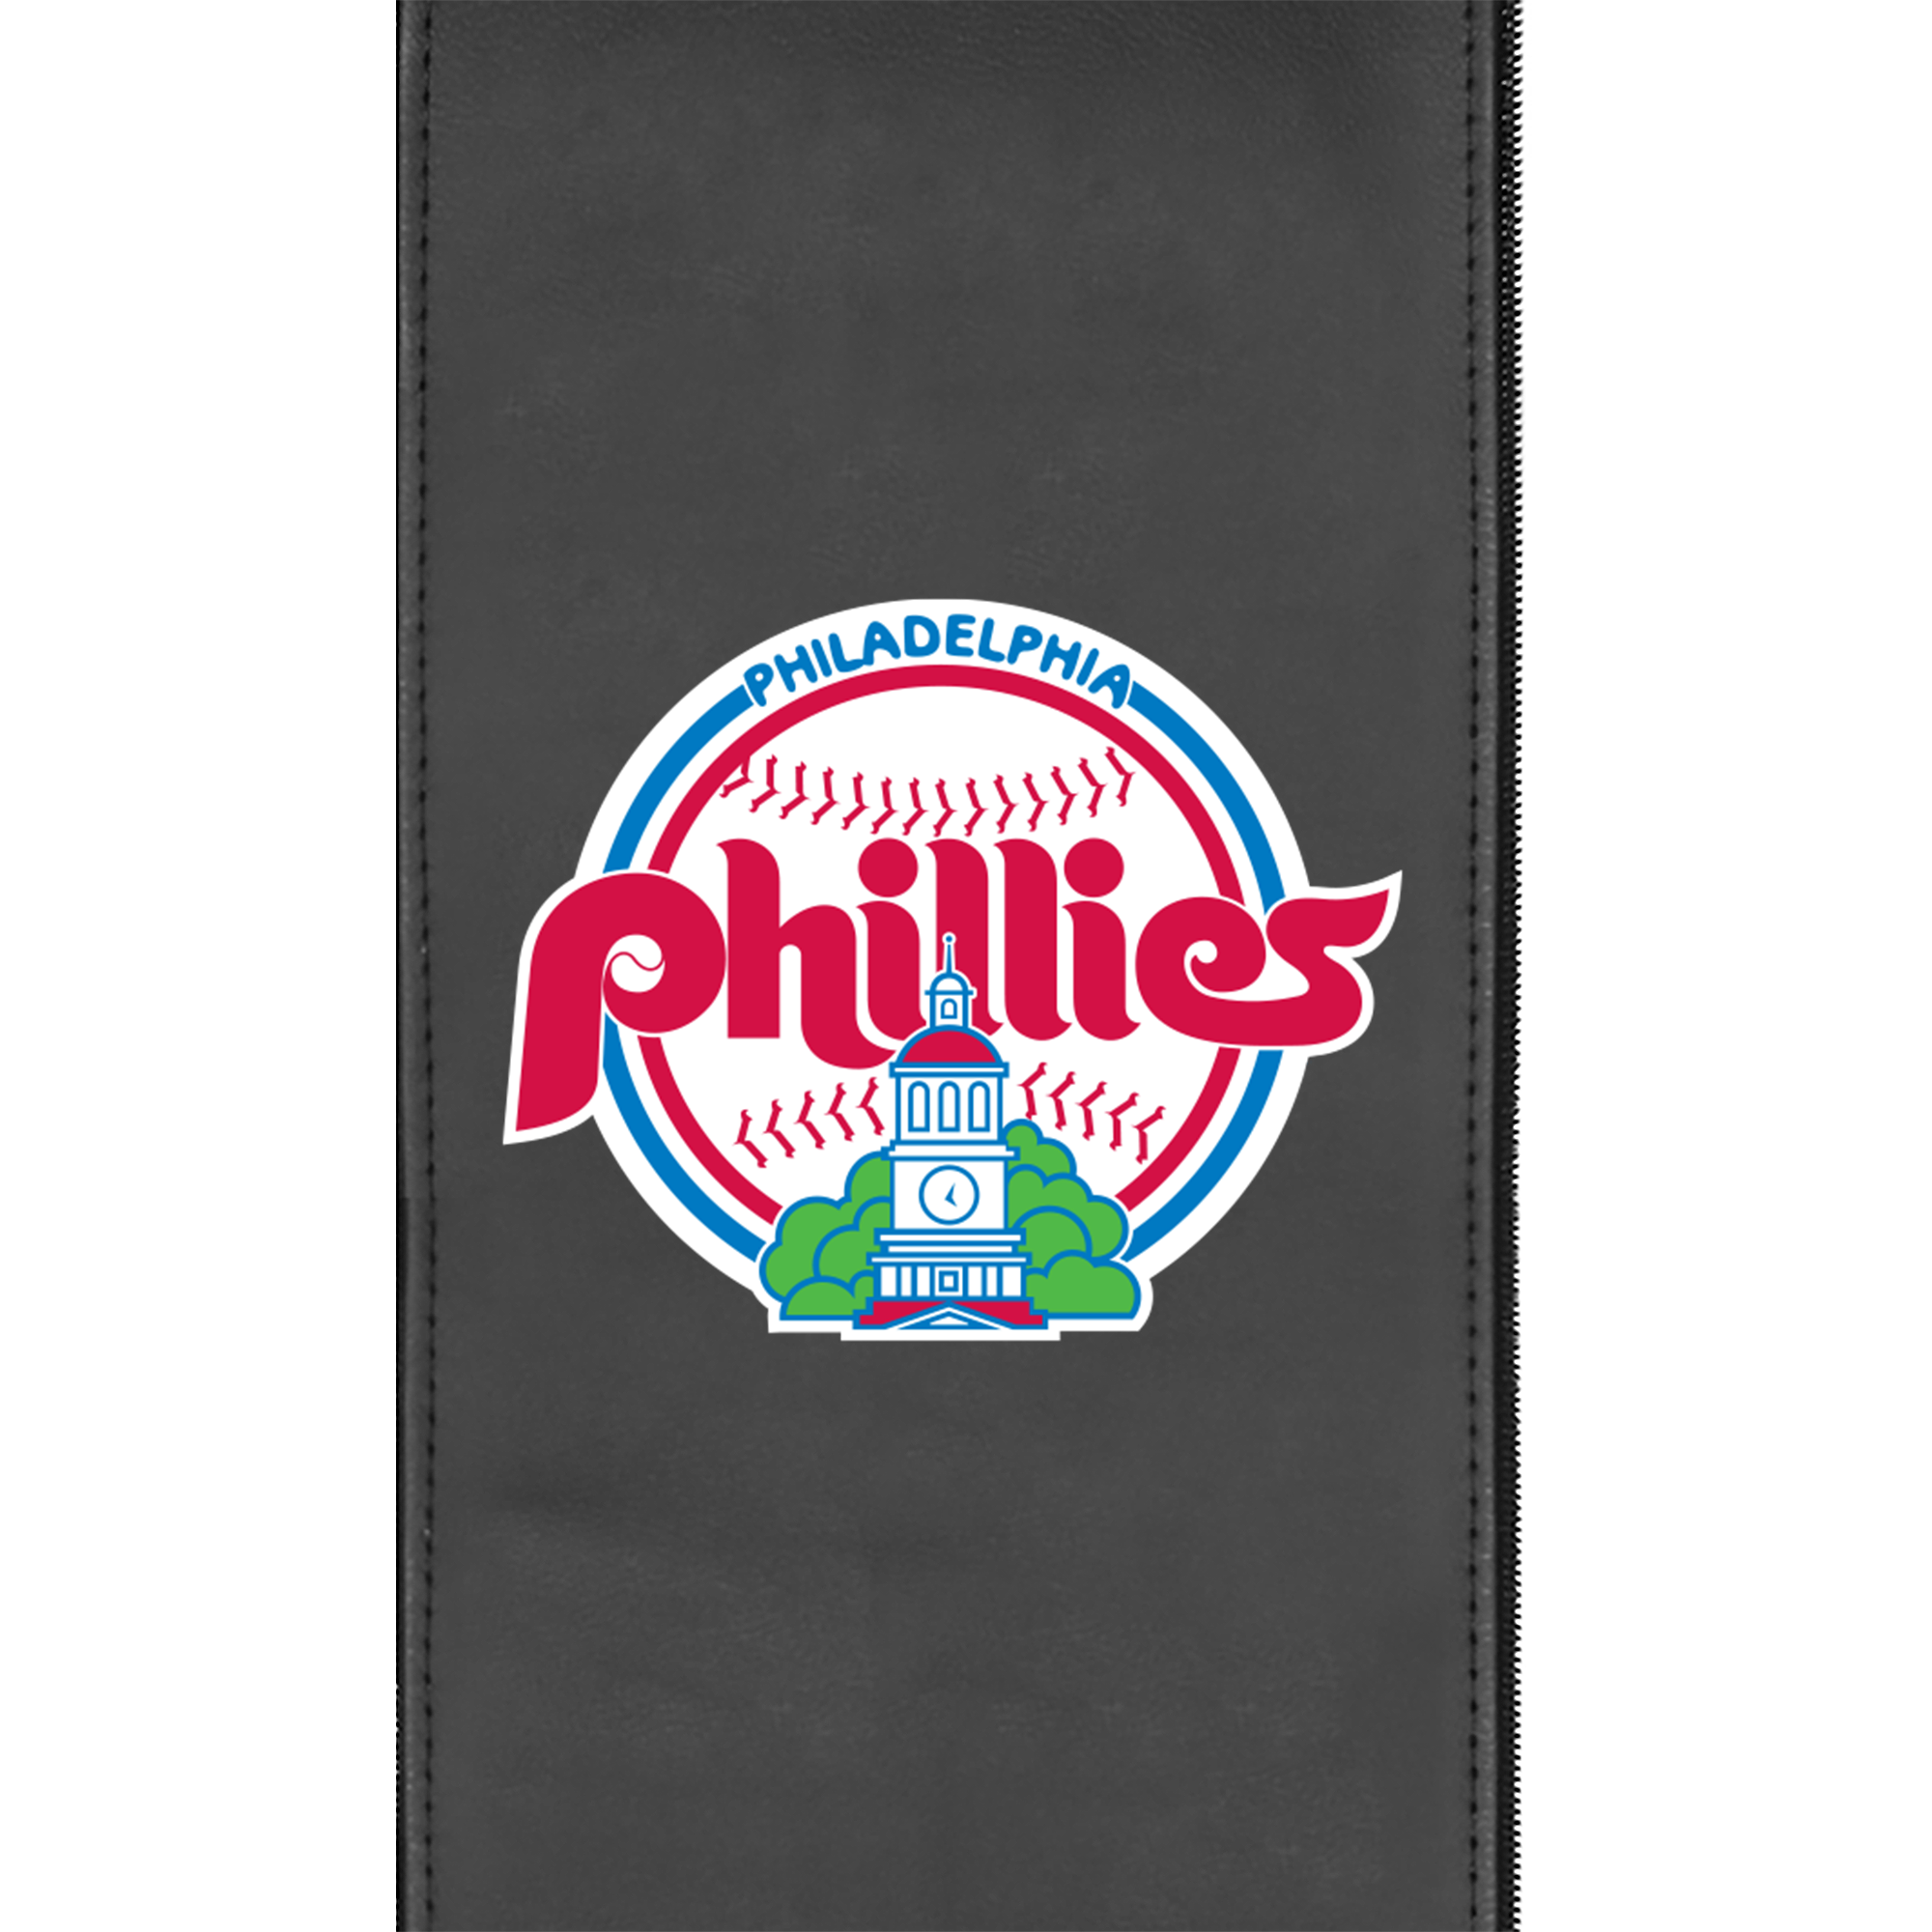 Relax Home Theater Recliner with Philadelphia Phillies Cooperstown Primary